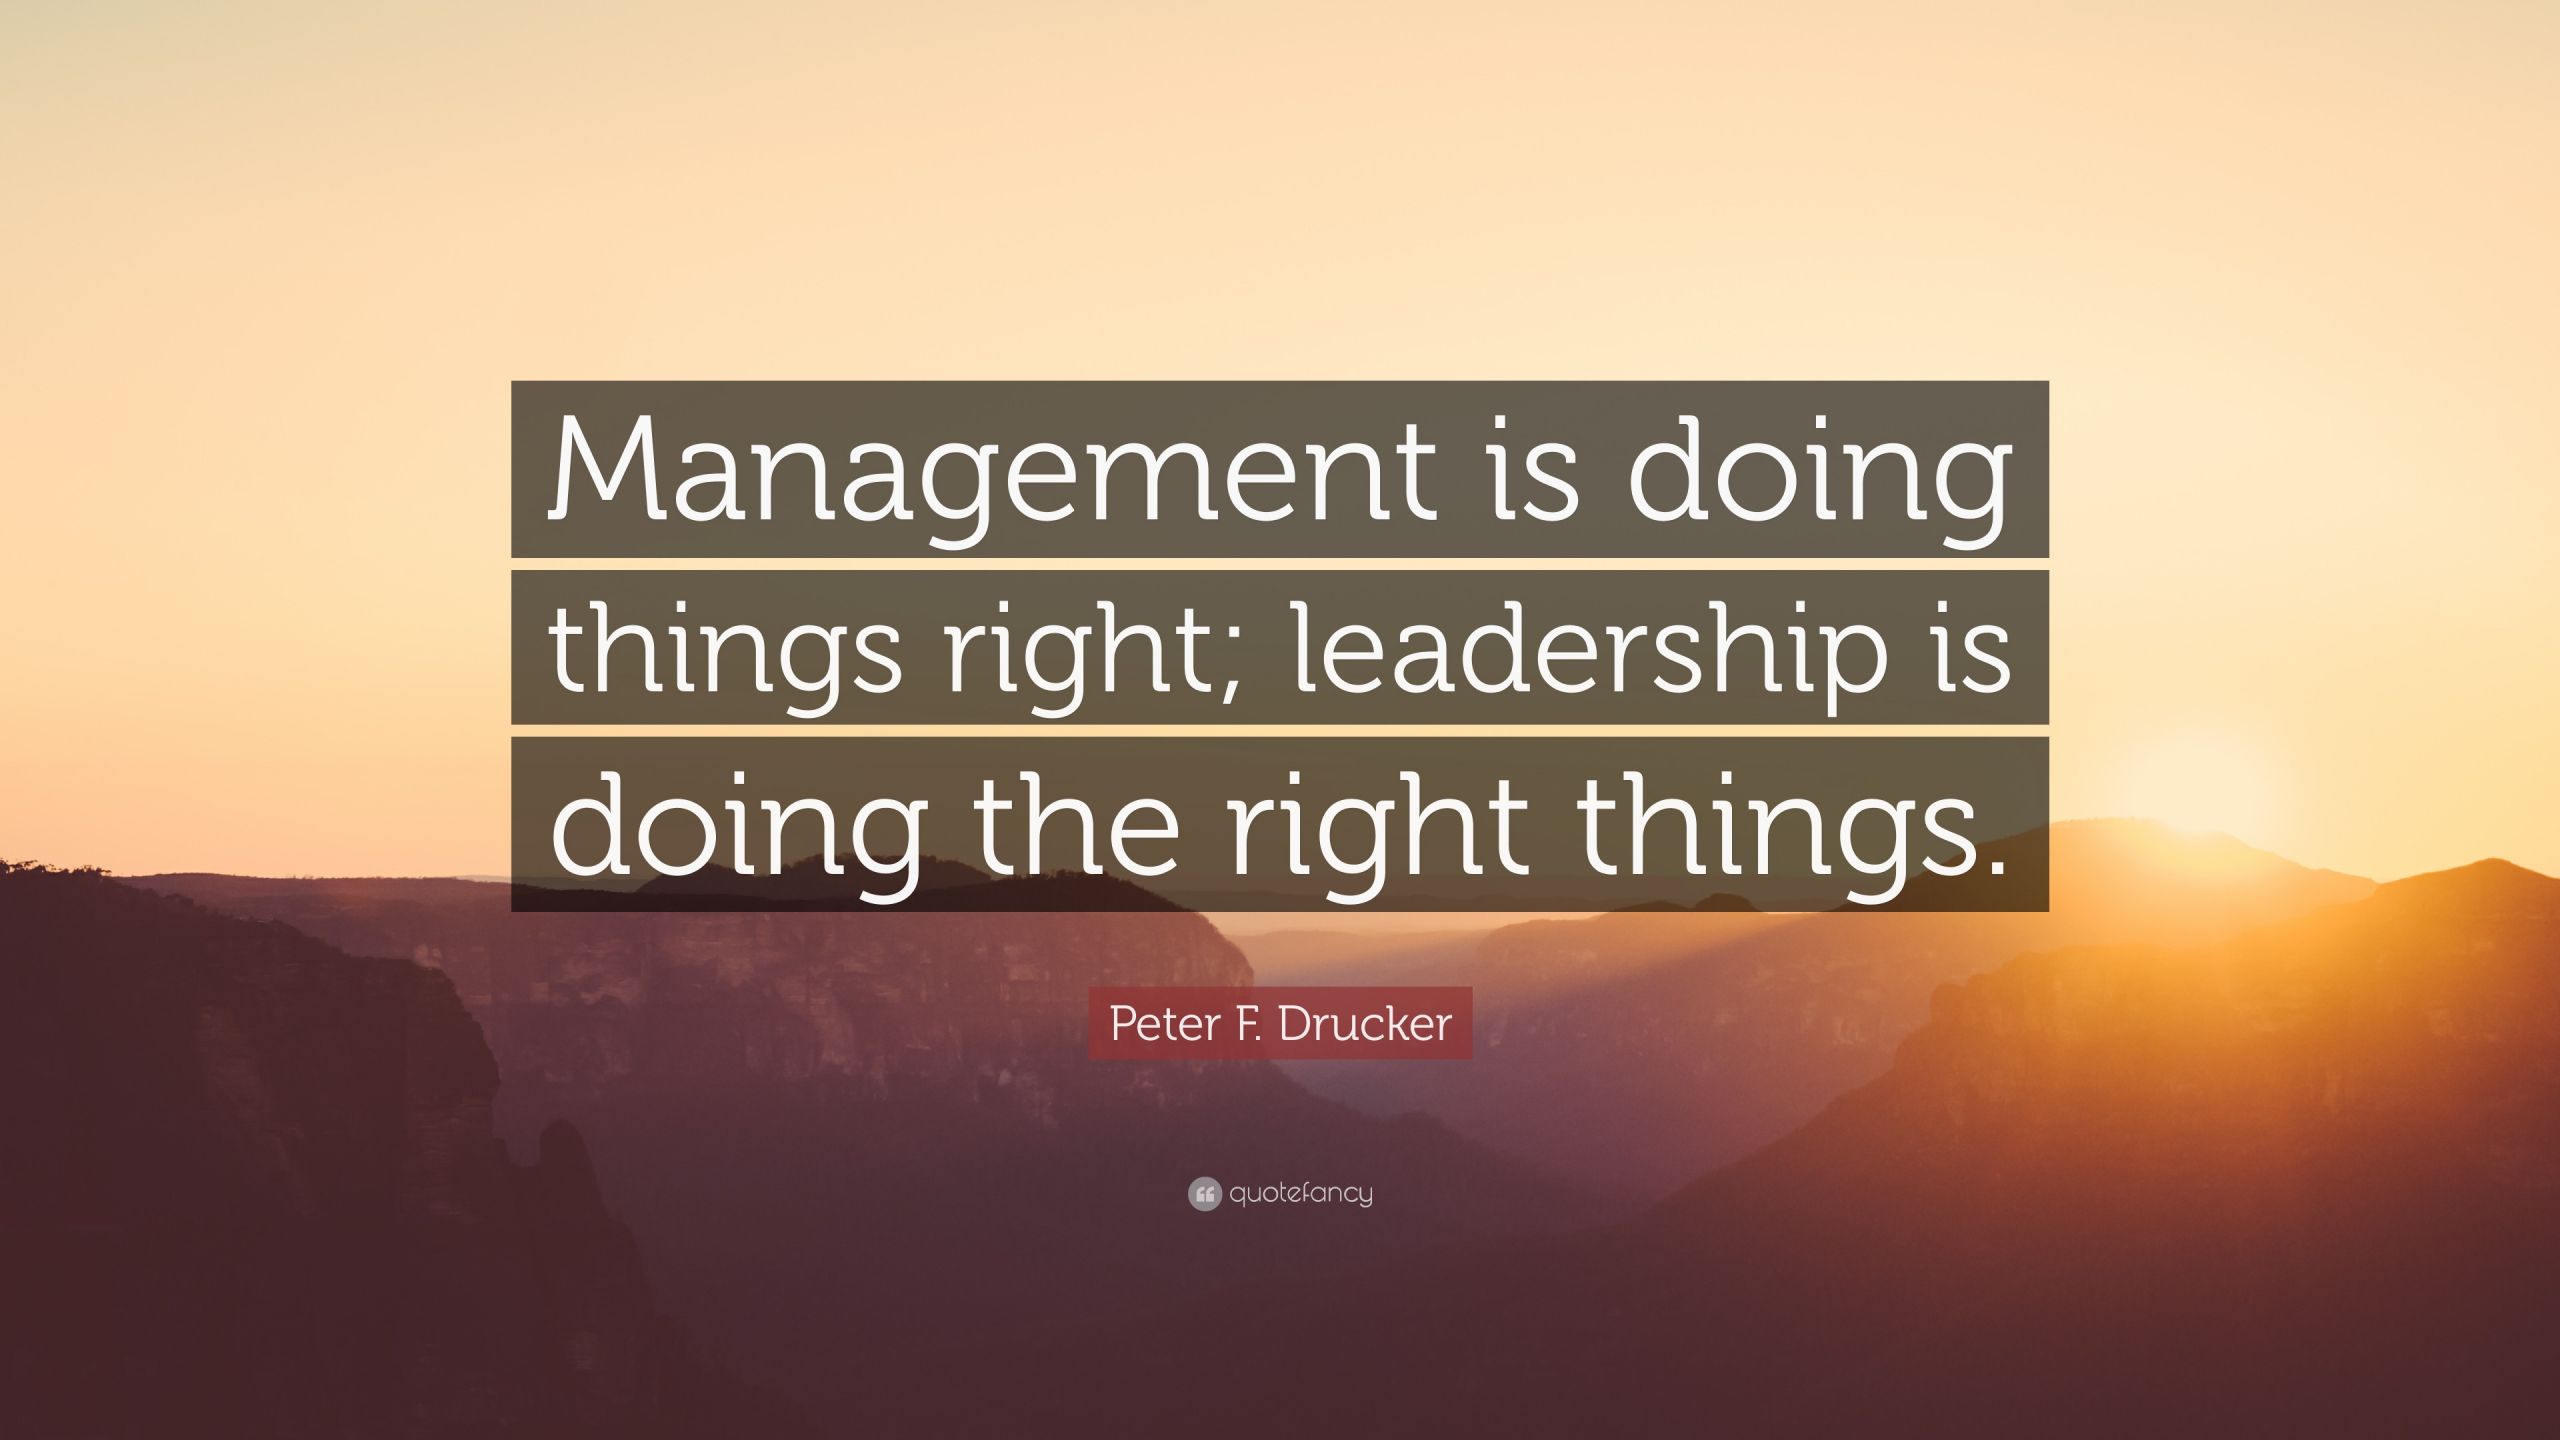 Quotes On Management And Leadership
 Peter F Drucker Quote “Management is doing things right